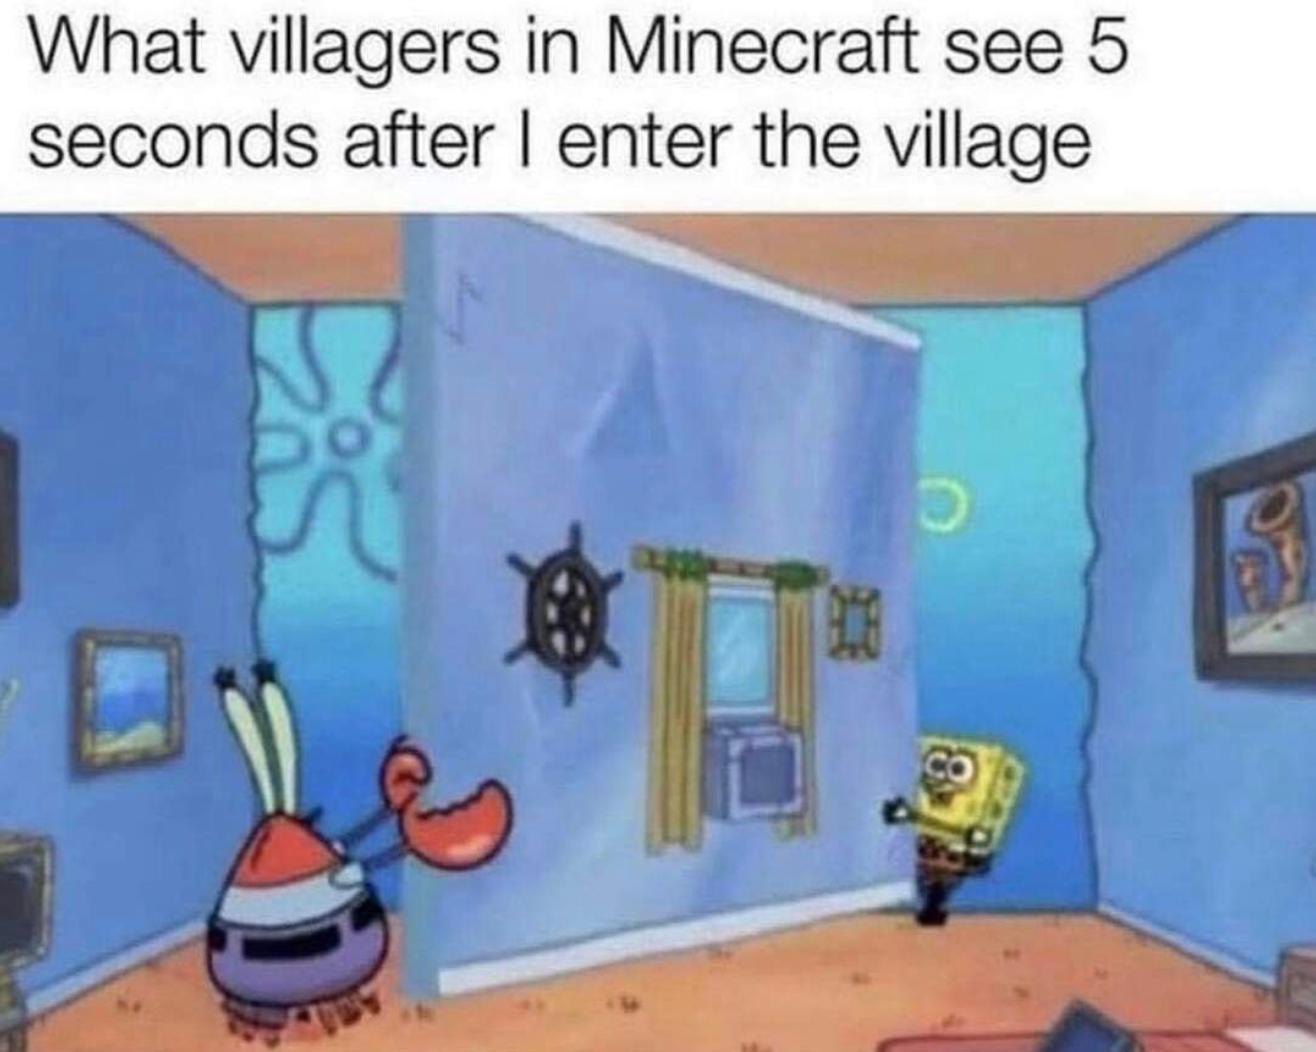 funny gaming memes - minecraft villagers meme - What villagers in Minecraft see 5 seconds after I enter the village